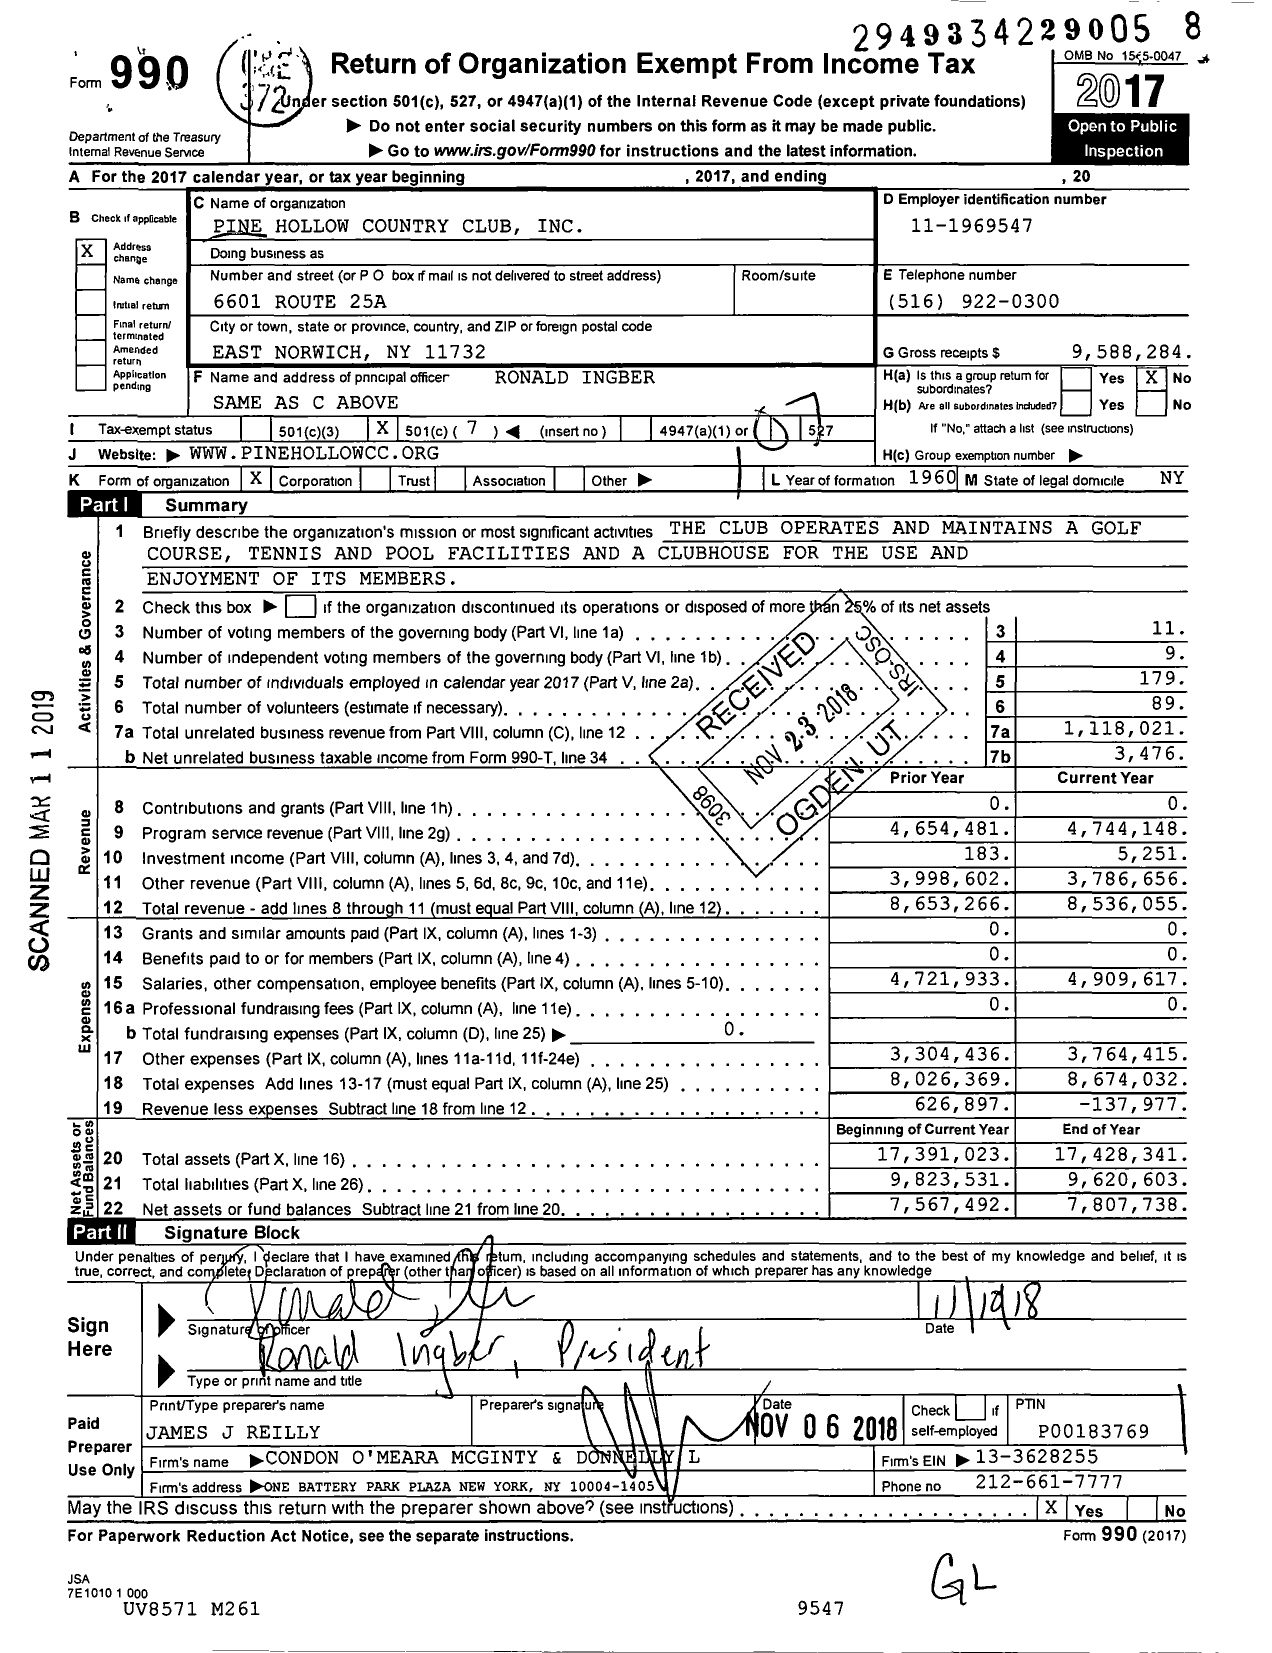 Image of first page of 2017 Form 990O for Pine Hollow Country Club